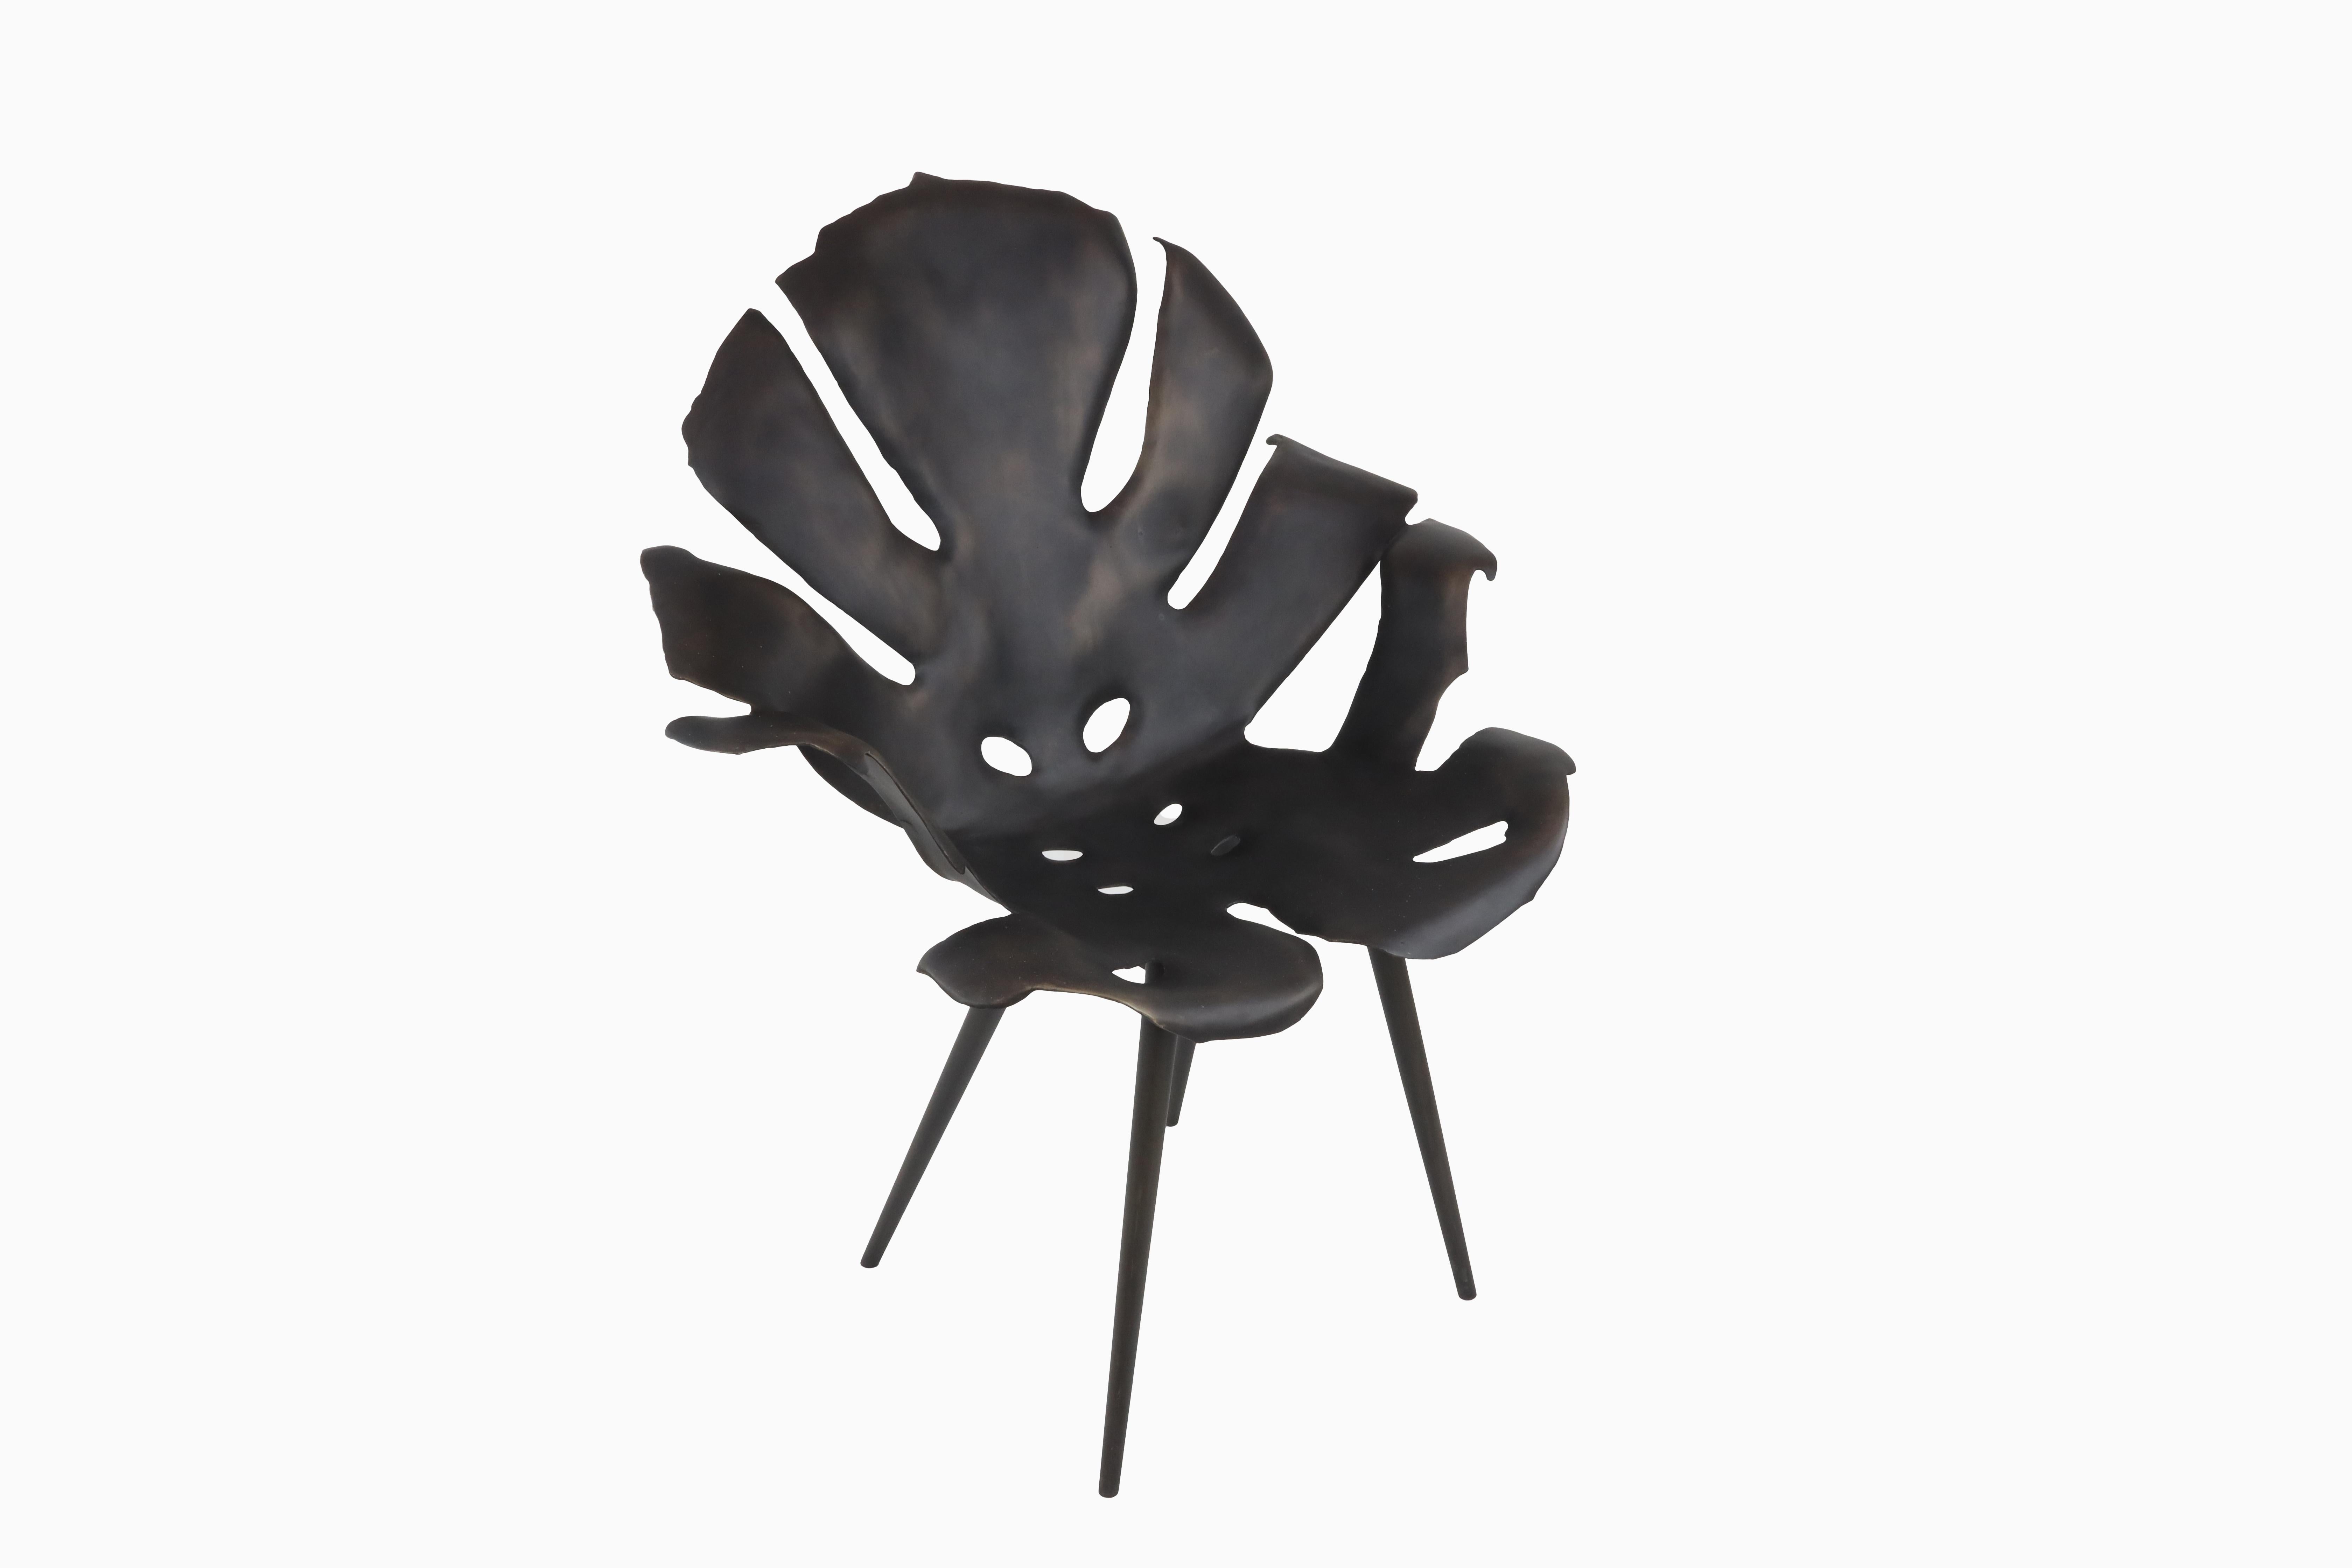 The Philodendron dining chair was hand-sculpted; be sure it's as comfortable as it is gorgeous! Each chair weighs about 40 pounds making it well suited for outdoor conditions, including gusty winds or indoors - on the right flooring. Each casting